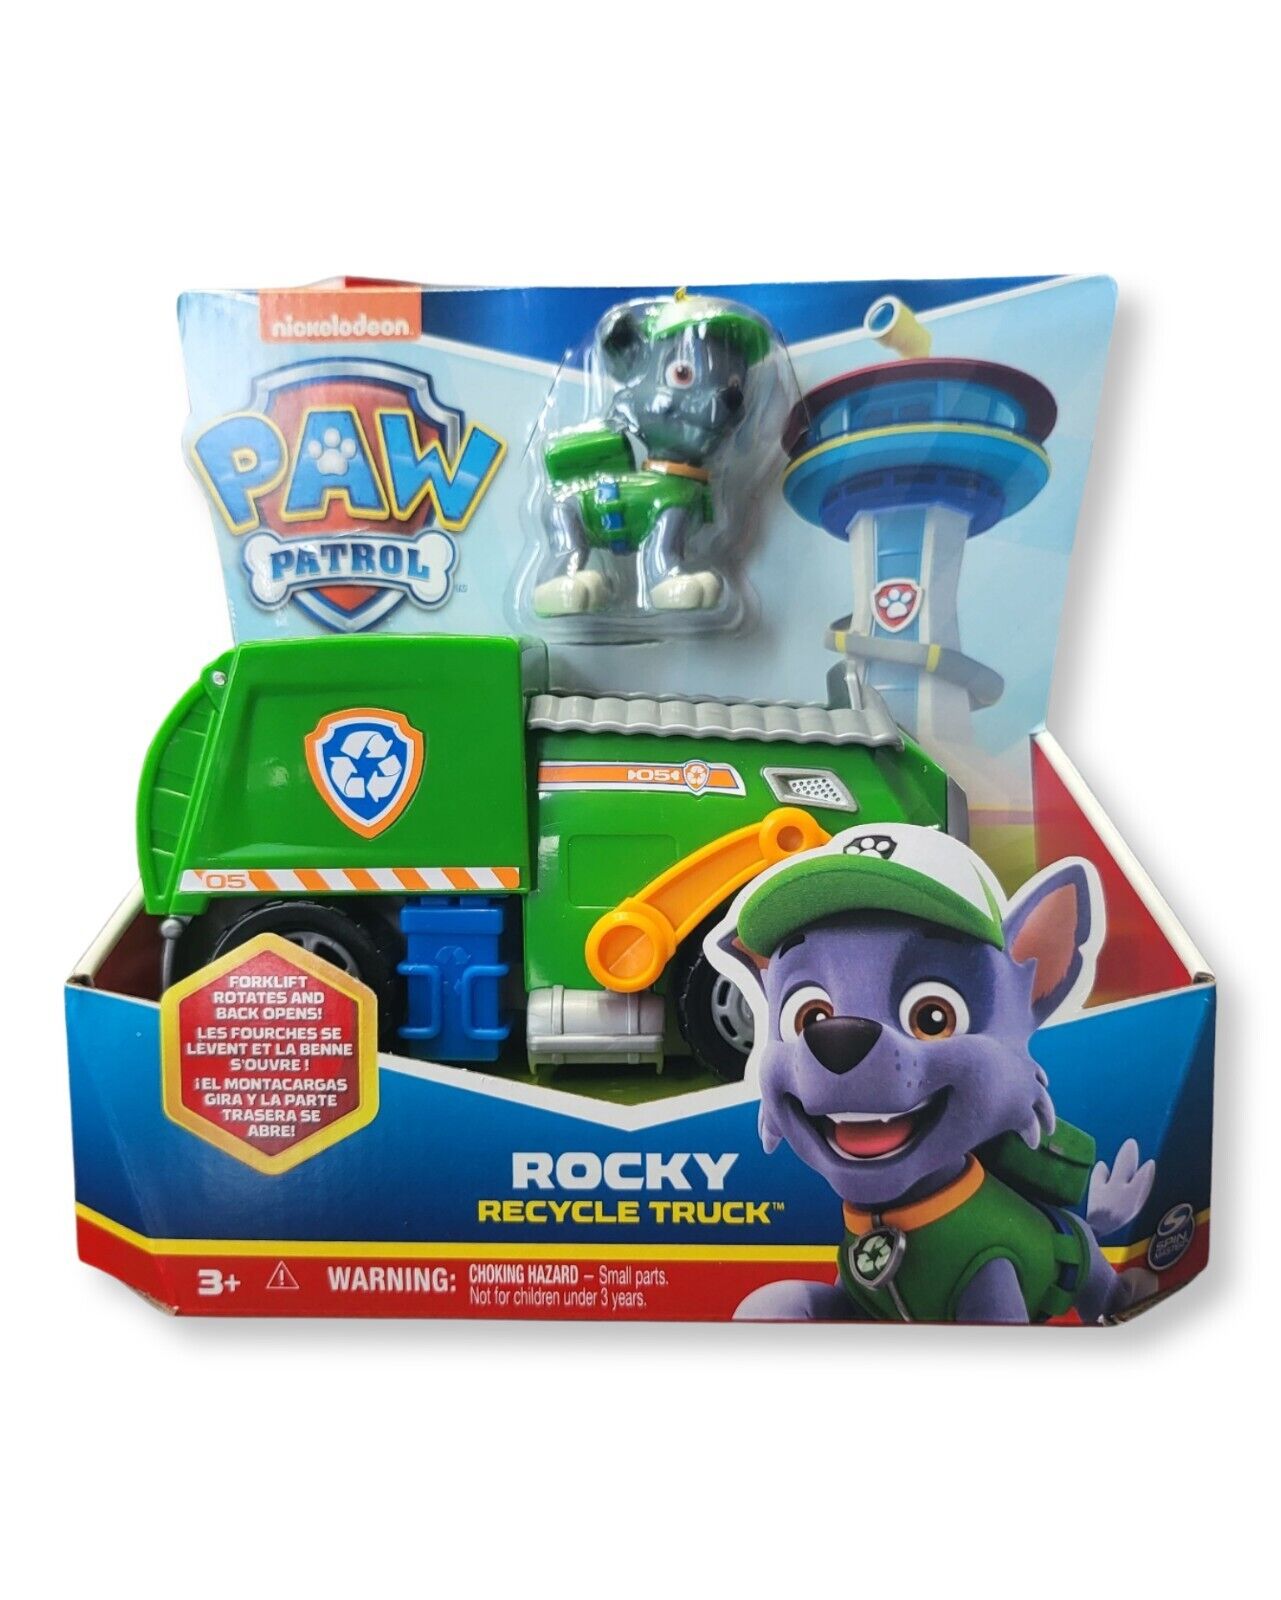 How to build Lego Paw Patrol Rocky Recycle Truck 